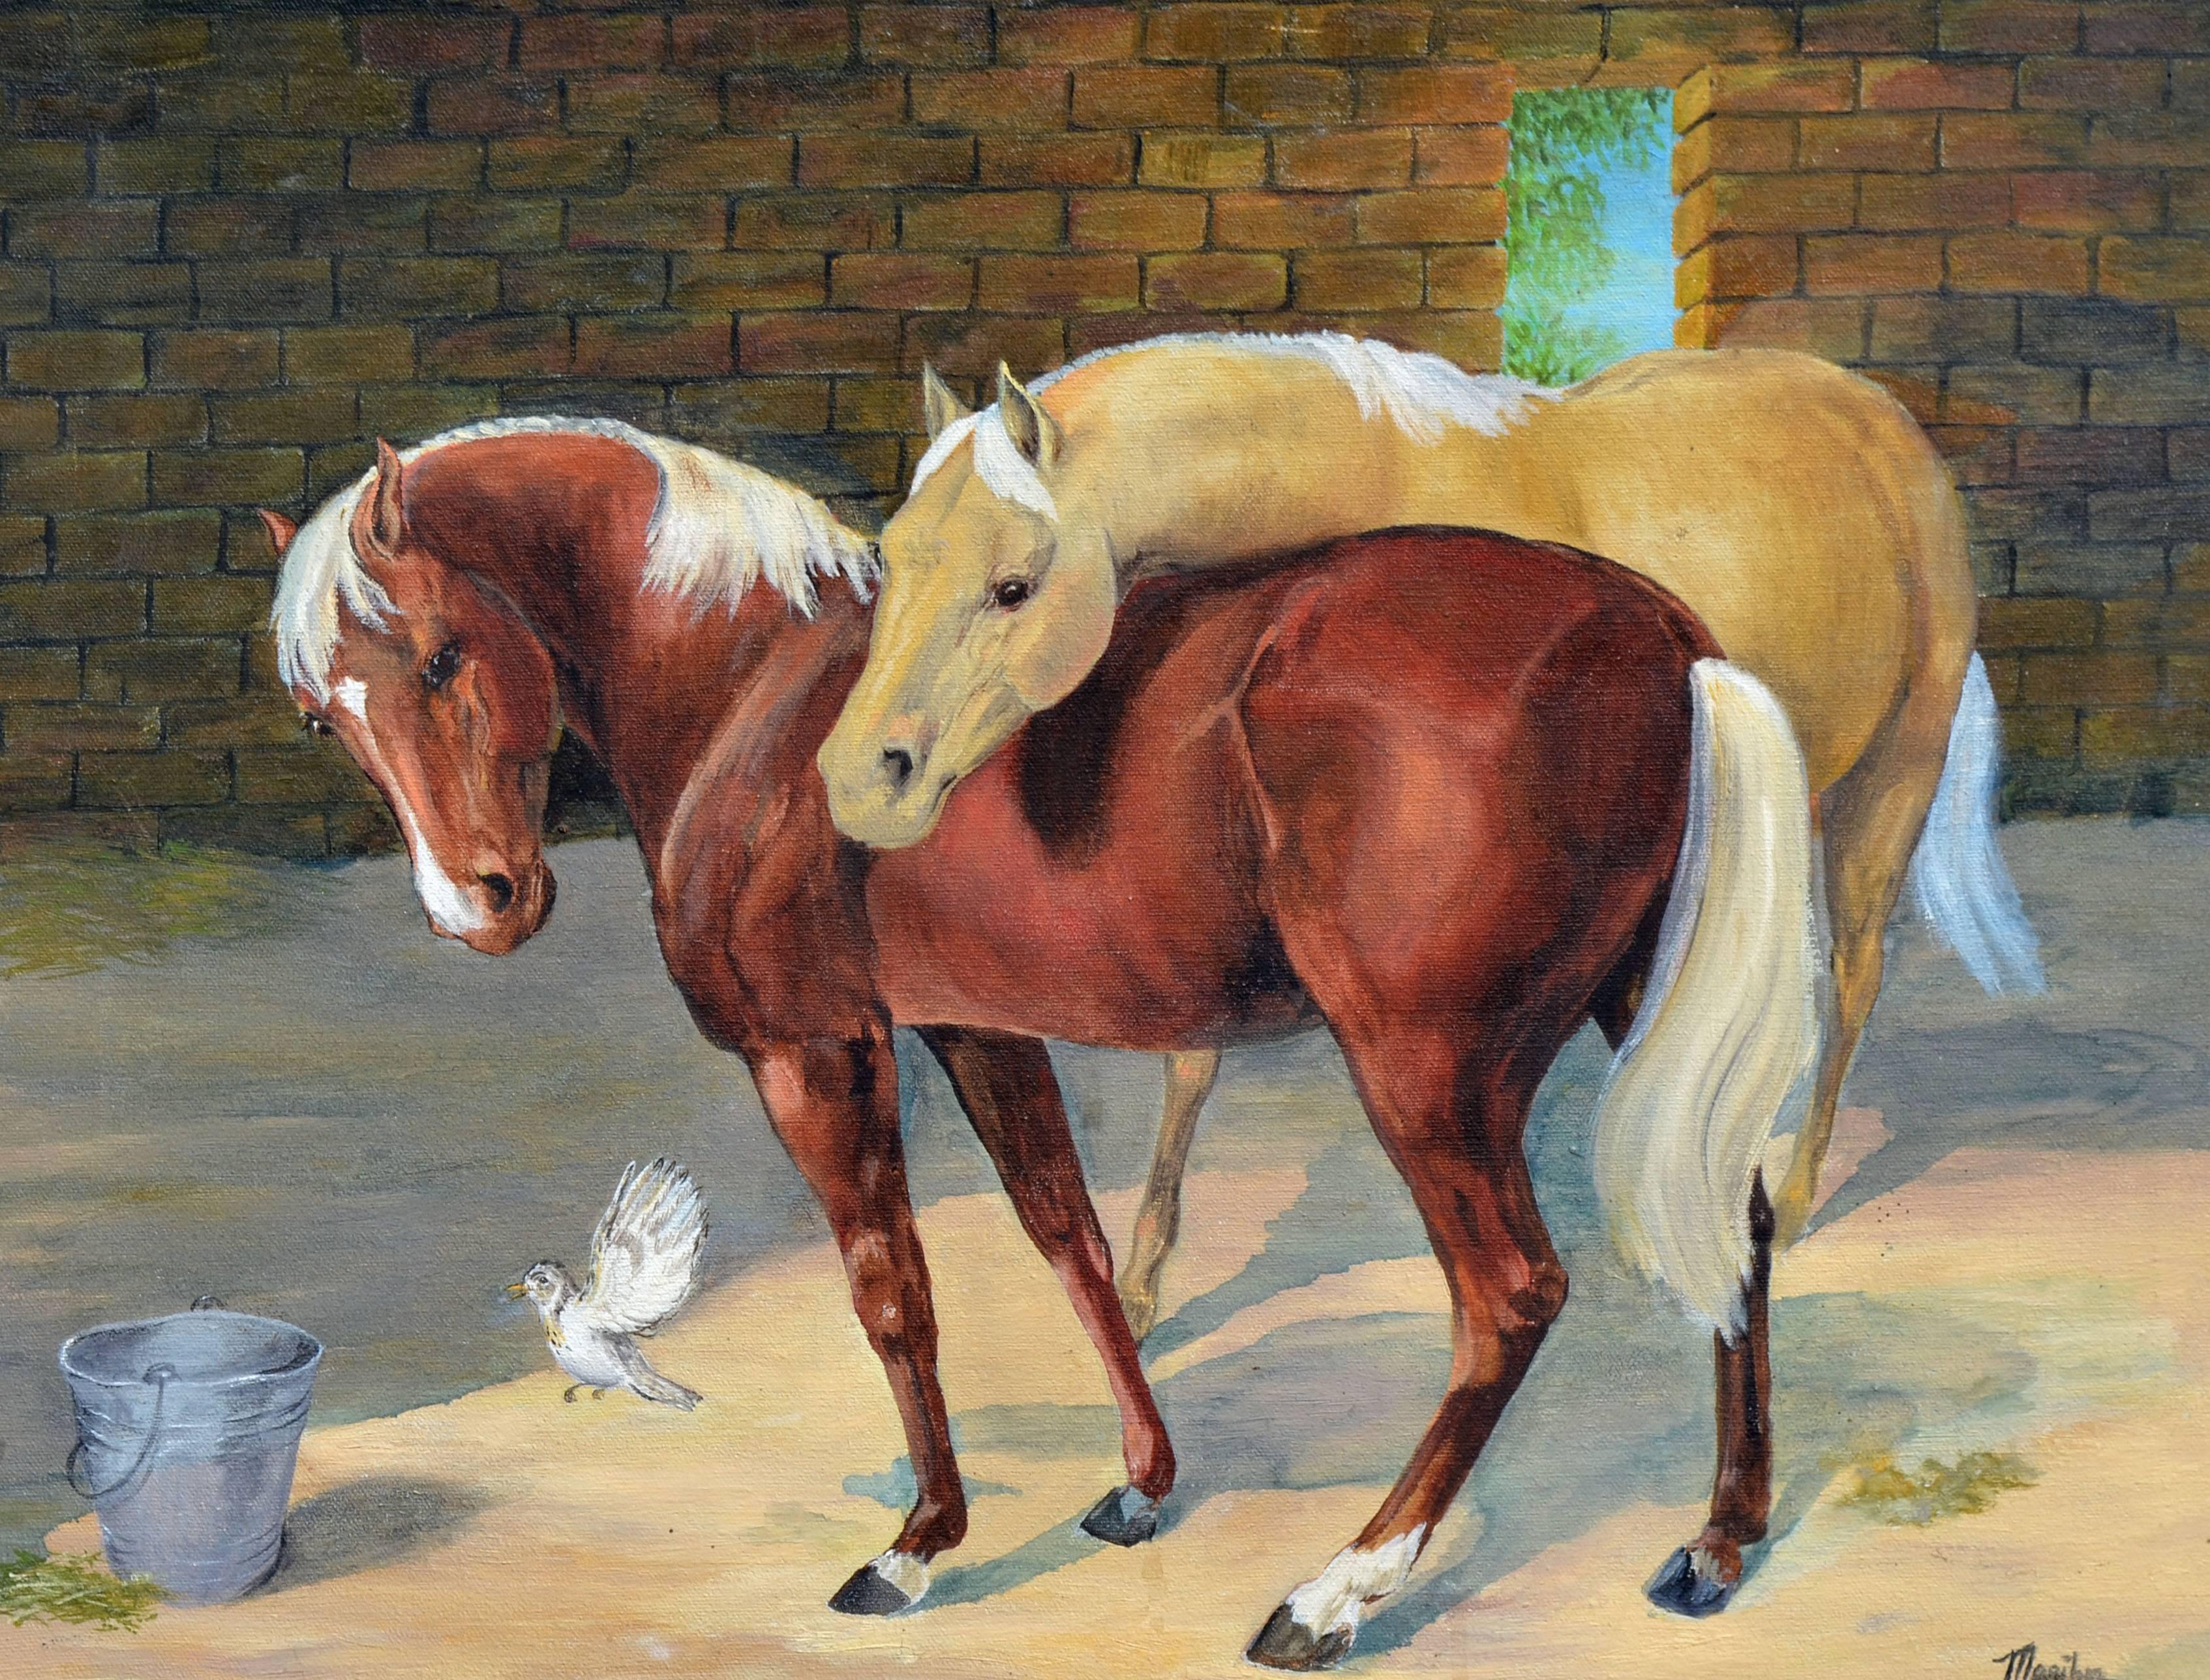 Two Horses on the Ranch  - Painting by Marilyn Mairs